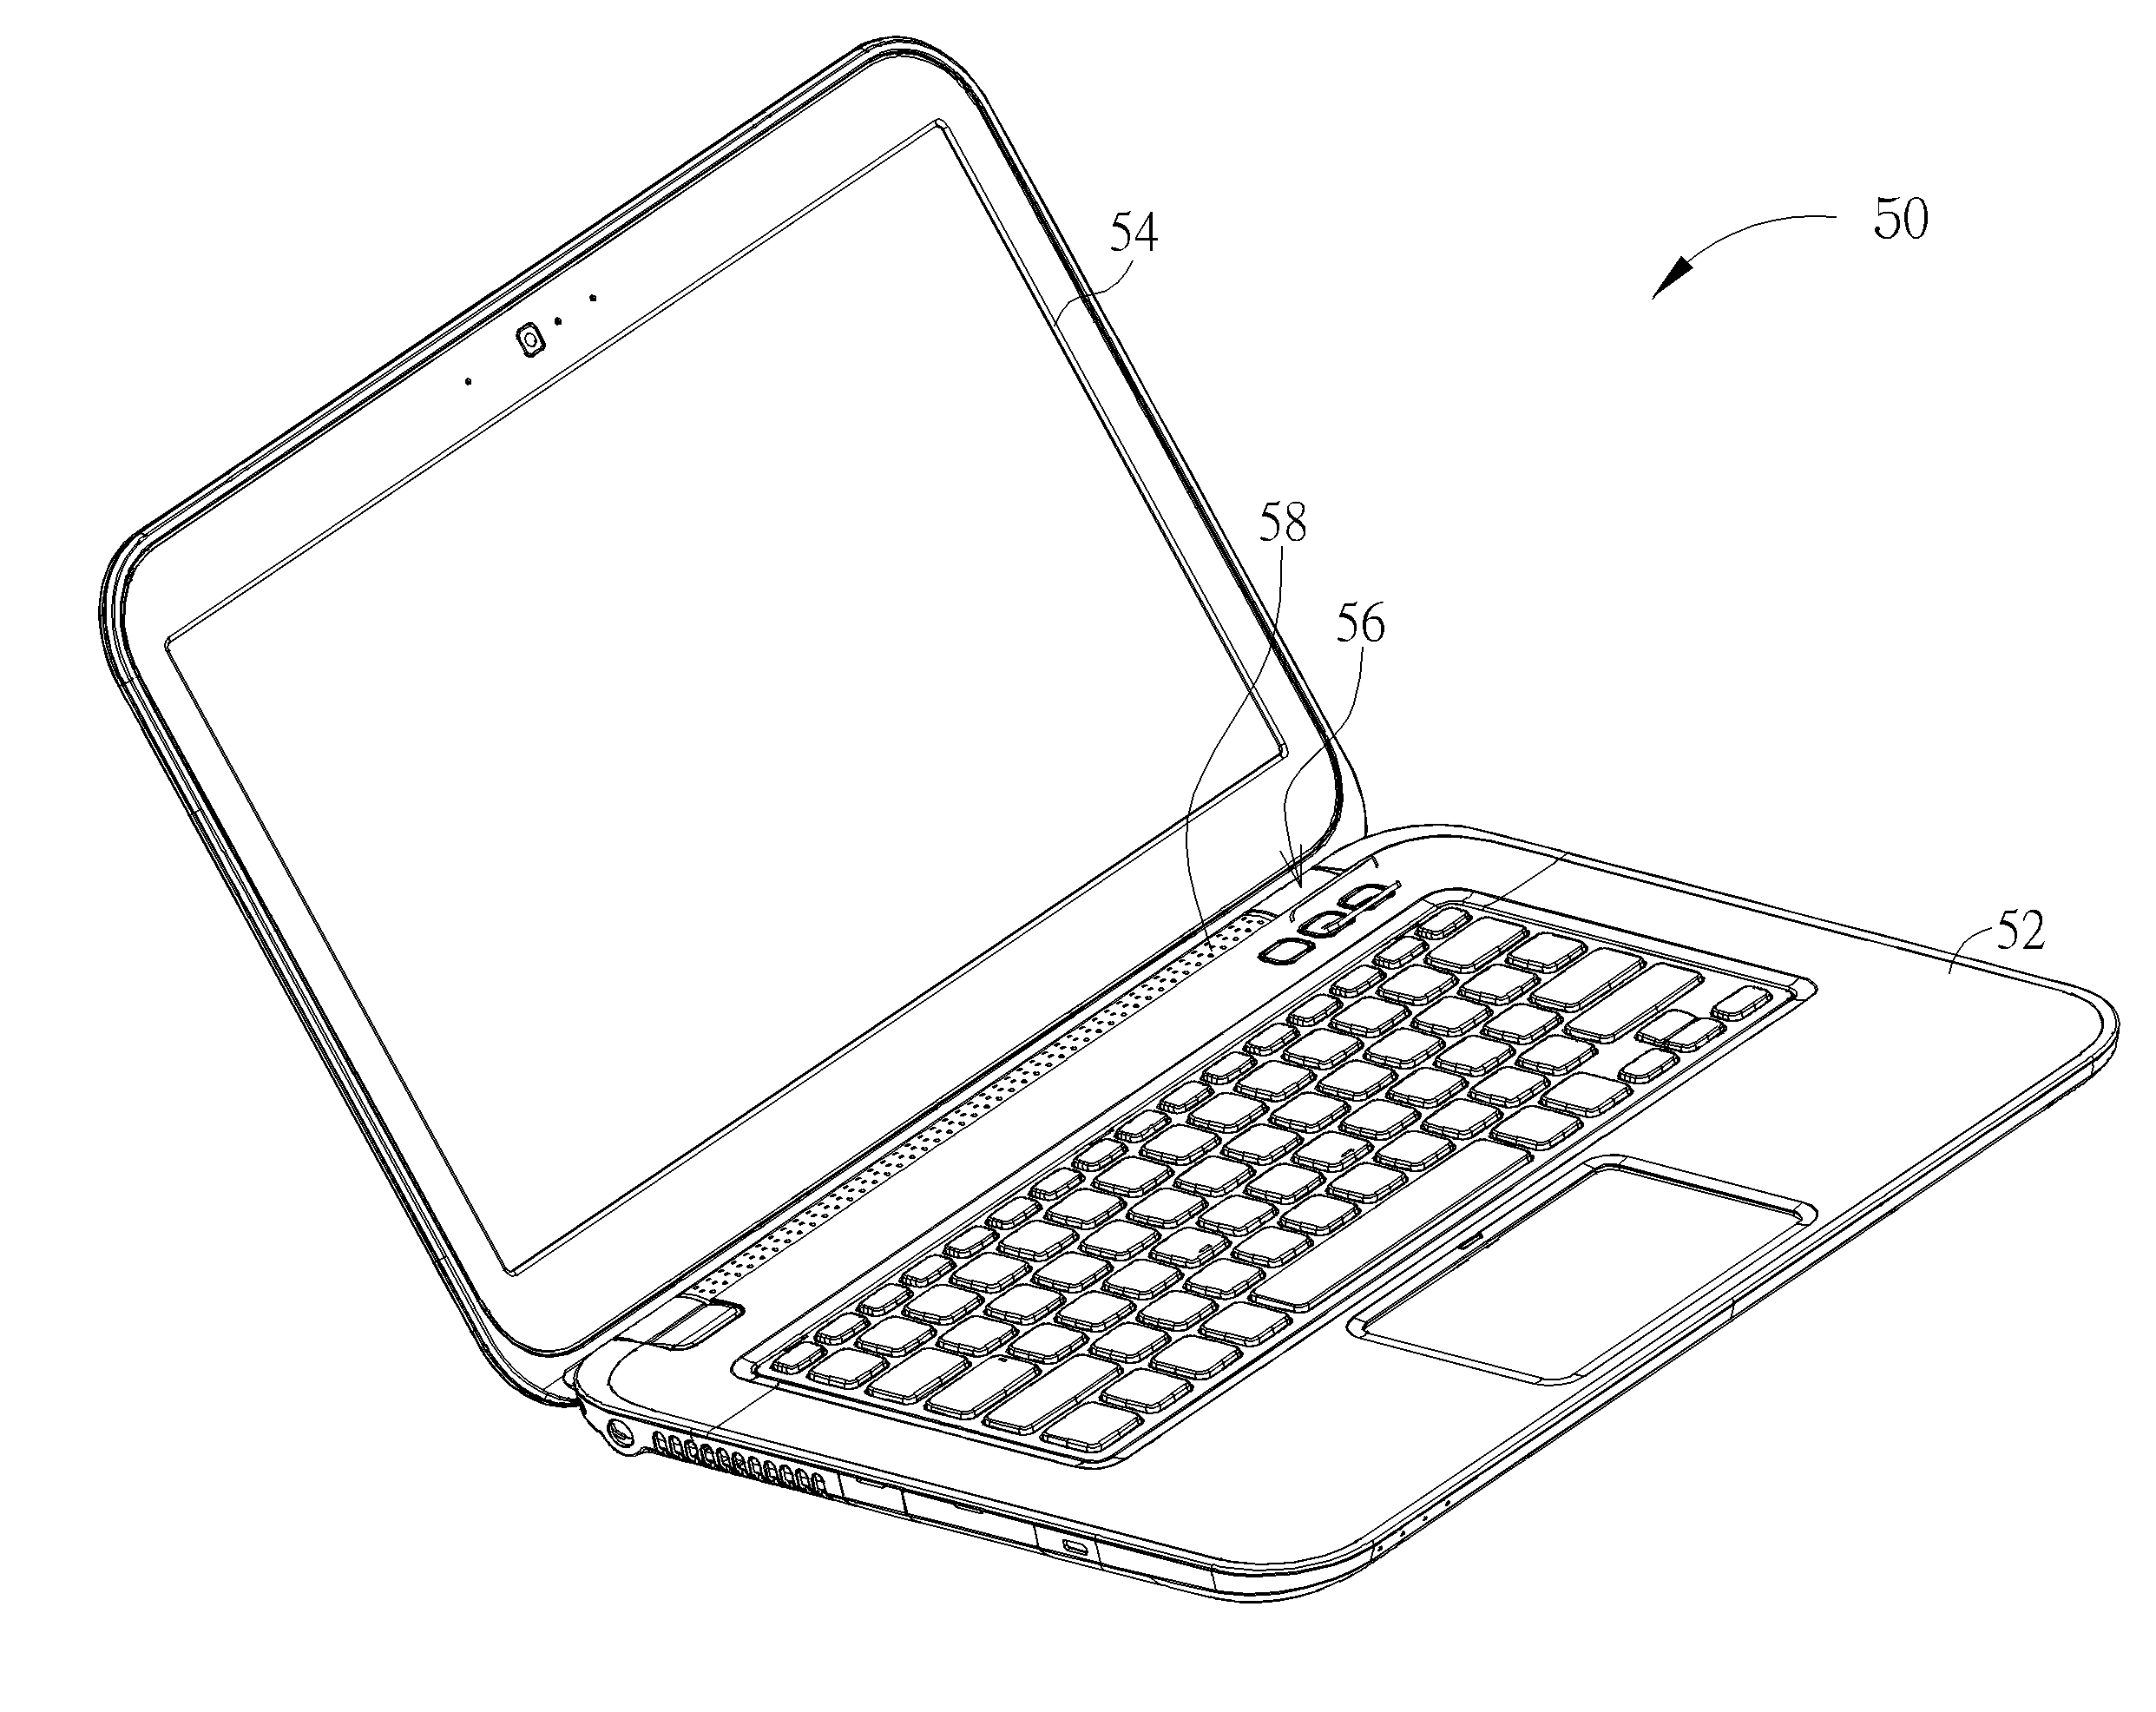 Portable electronic device with an electronic module